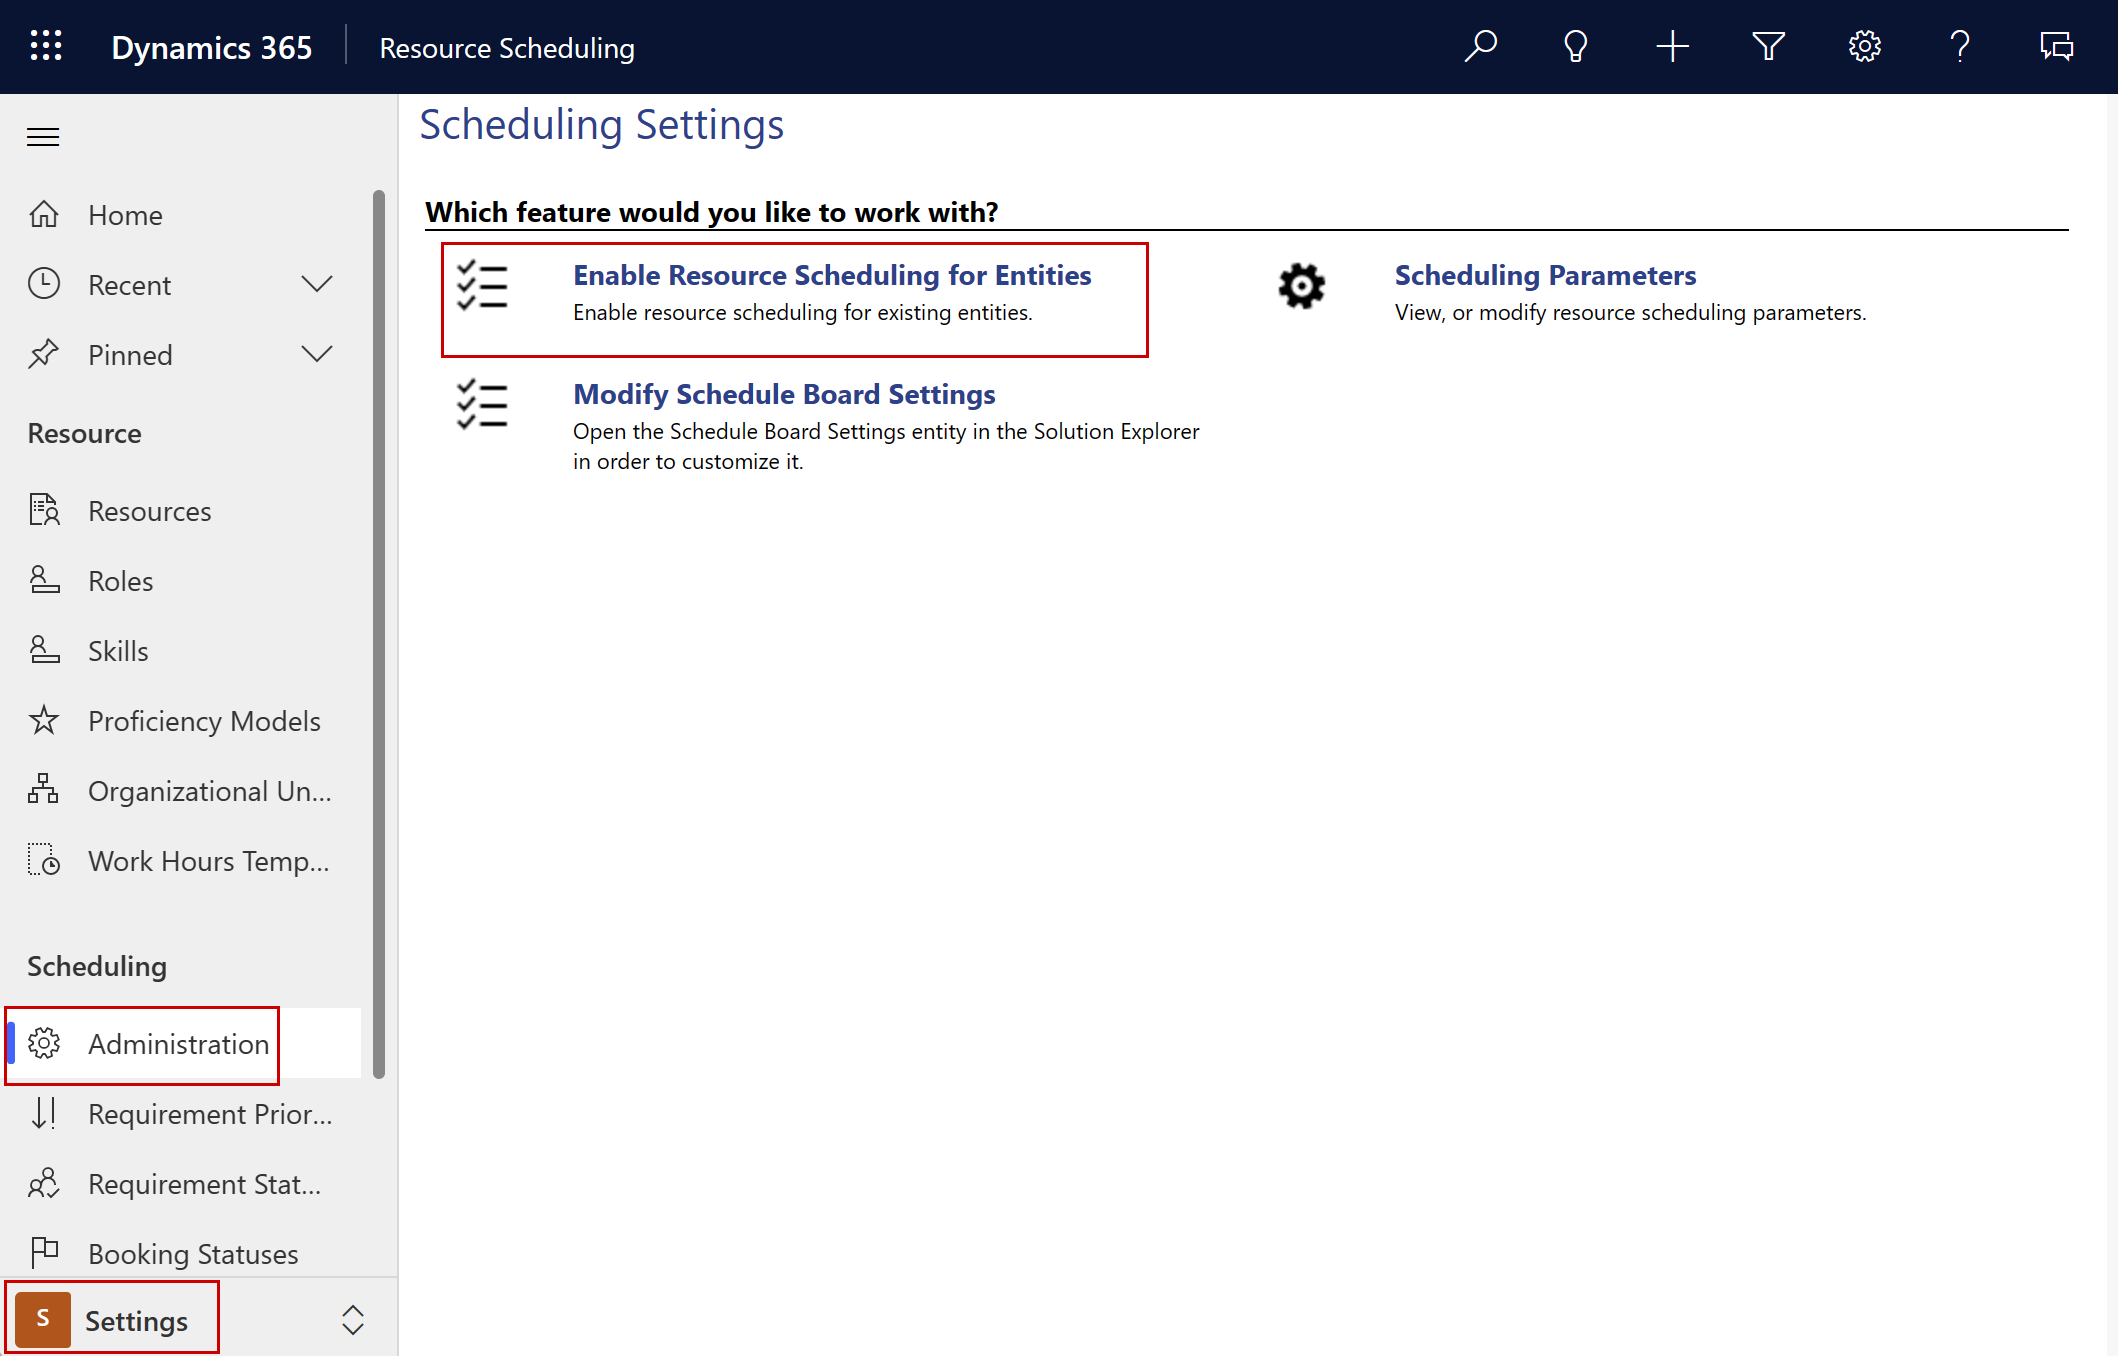 Screenshot of scheduling settings showing the Enable Resource Scheduling for Entities option.